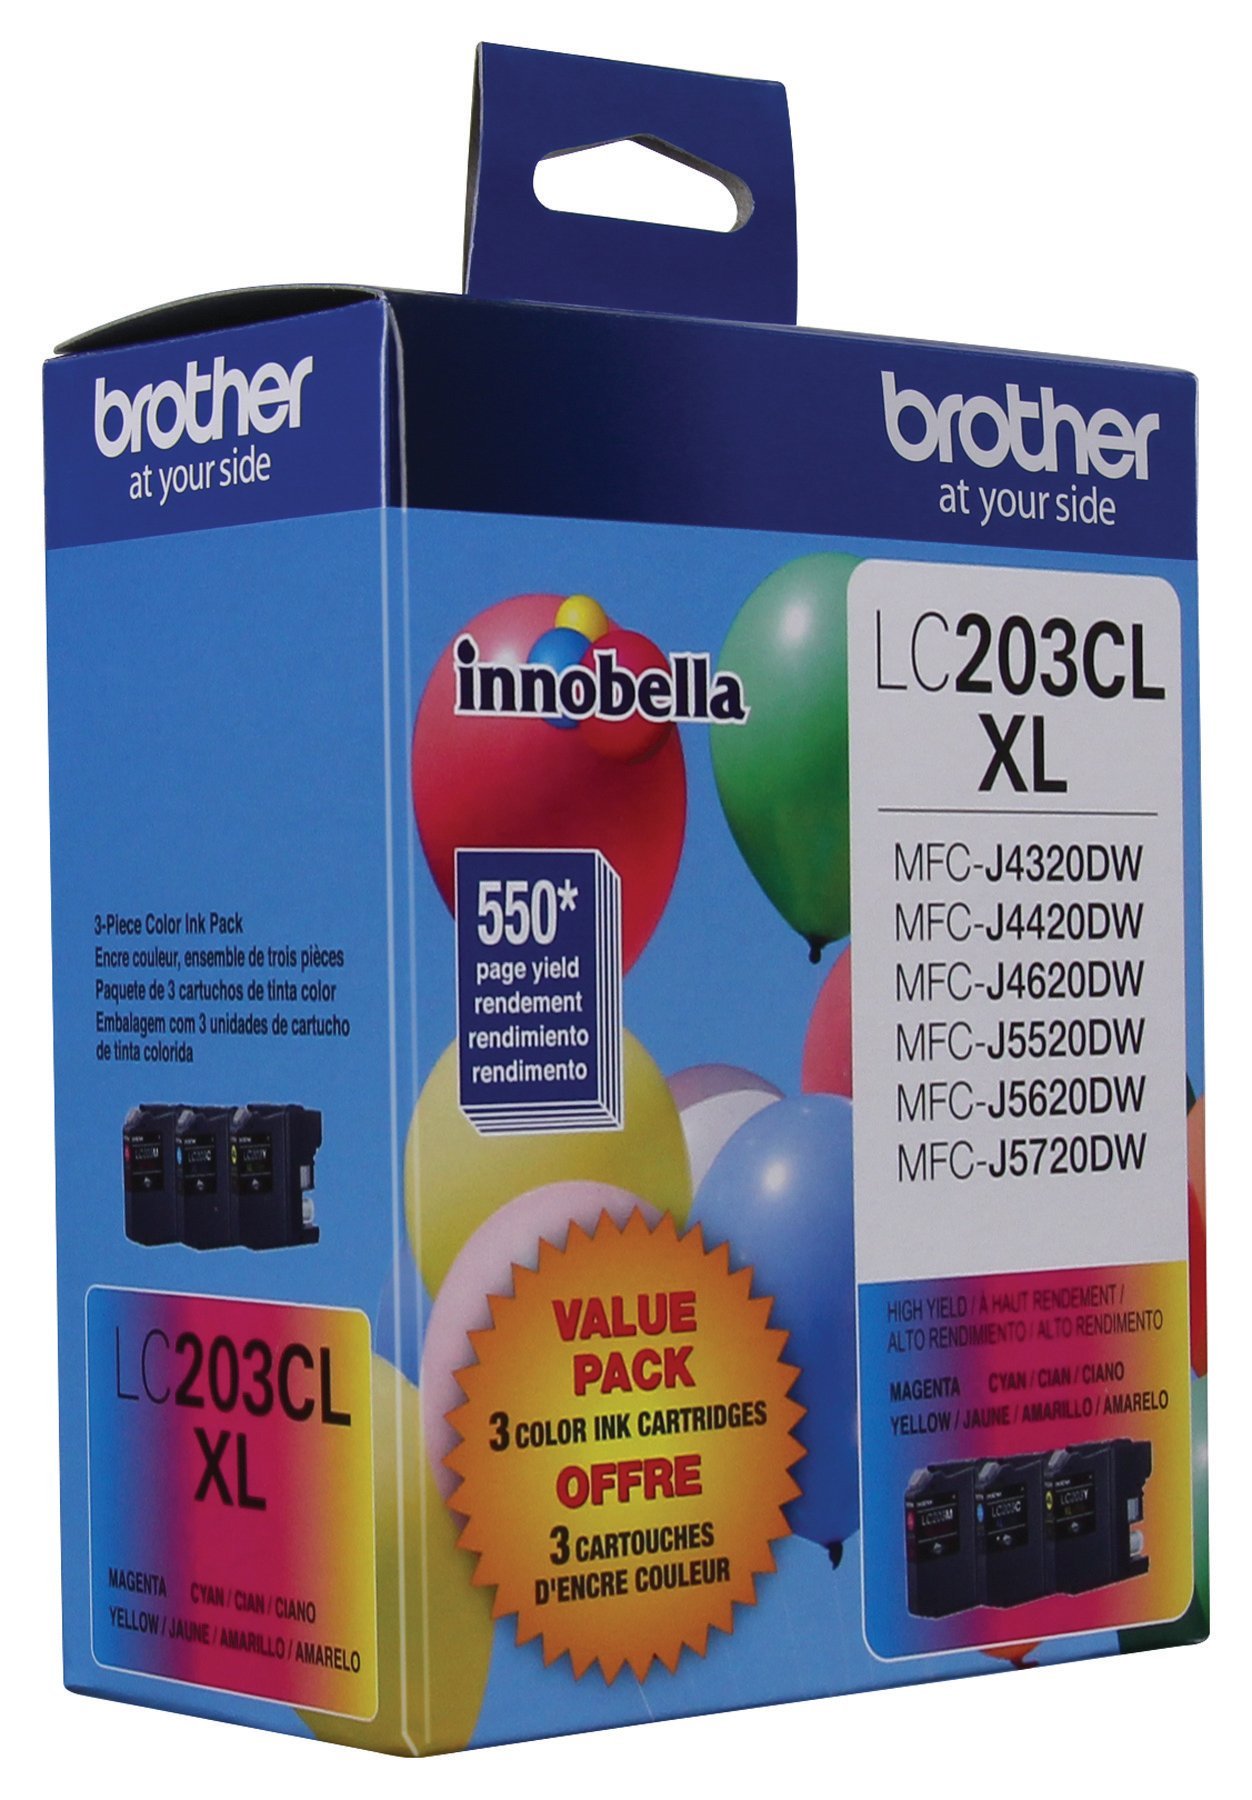 Brother Printers Ink Refills - Amazon - LC203 Color Multi Pack for $23.44 - LC203 Black 2-pack for $25.89